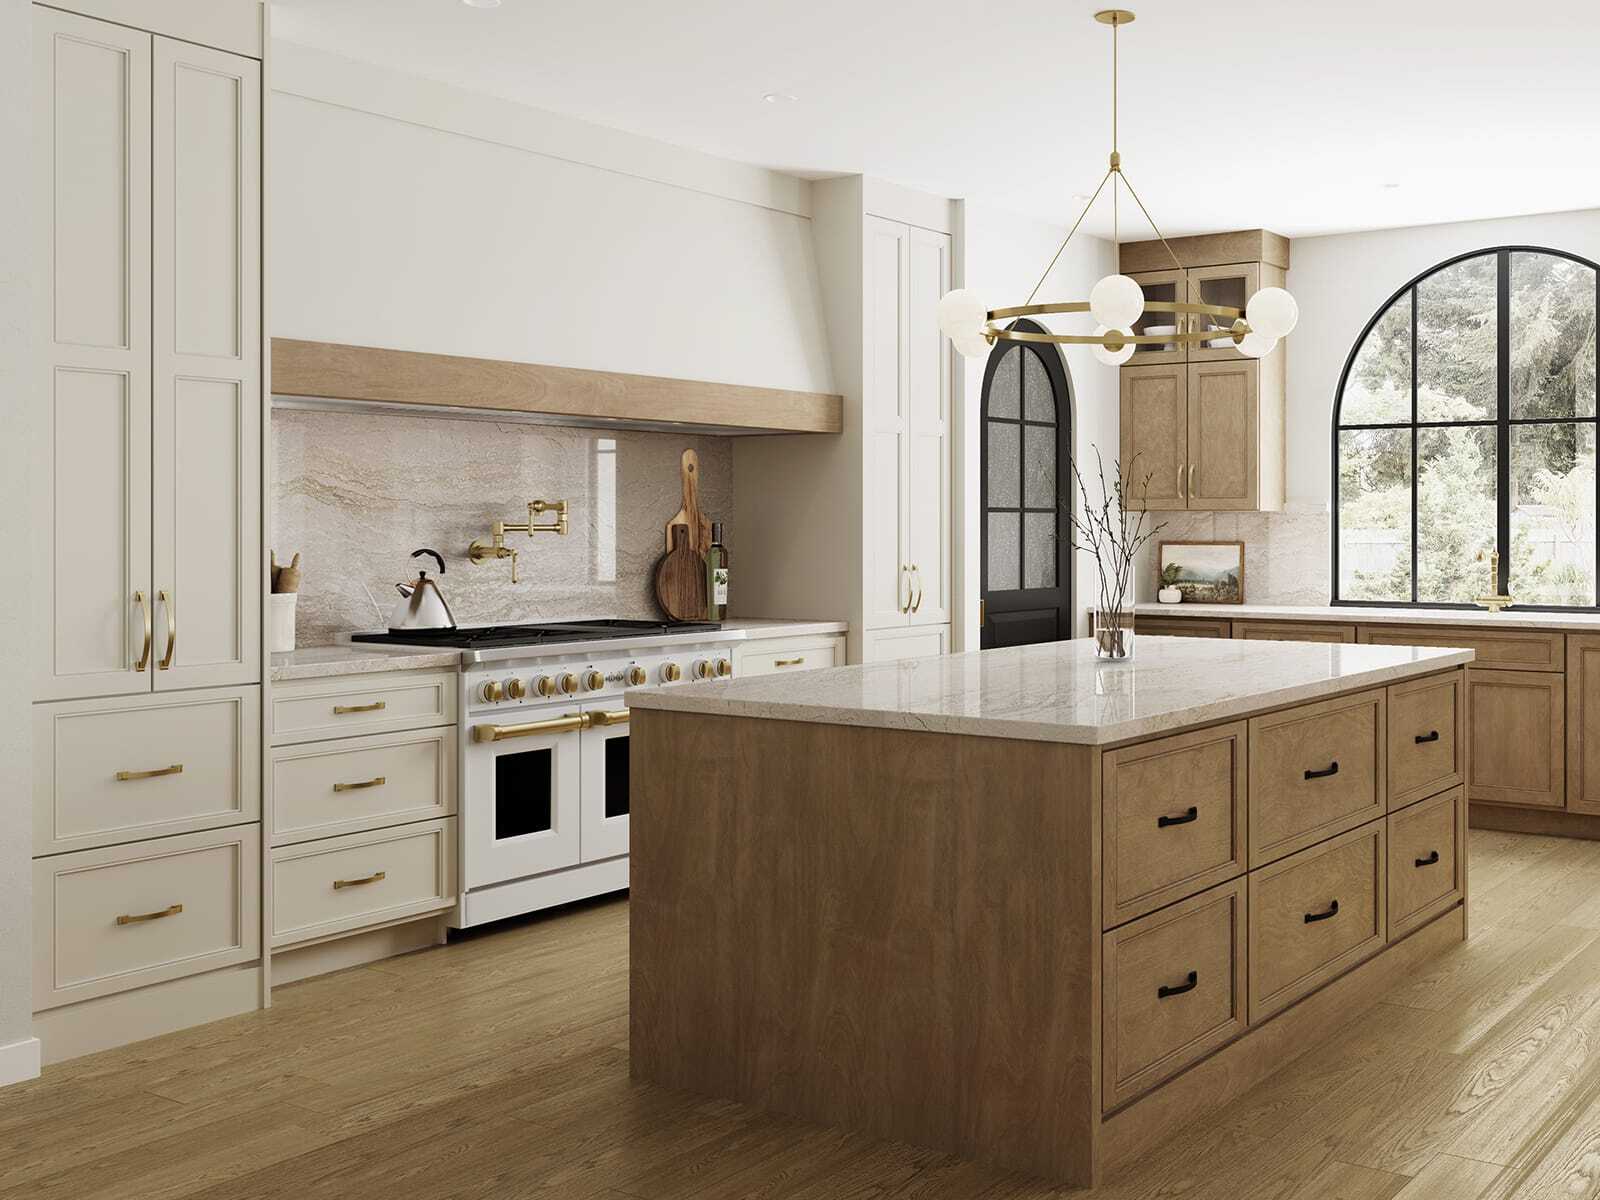 See Unique Kitchen Design Ideas In a Variety of Styles and Aesthetics